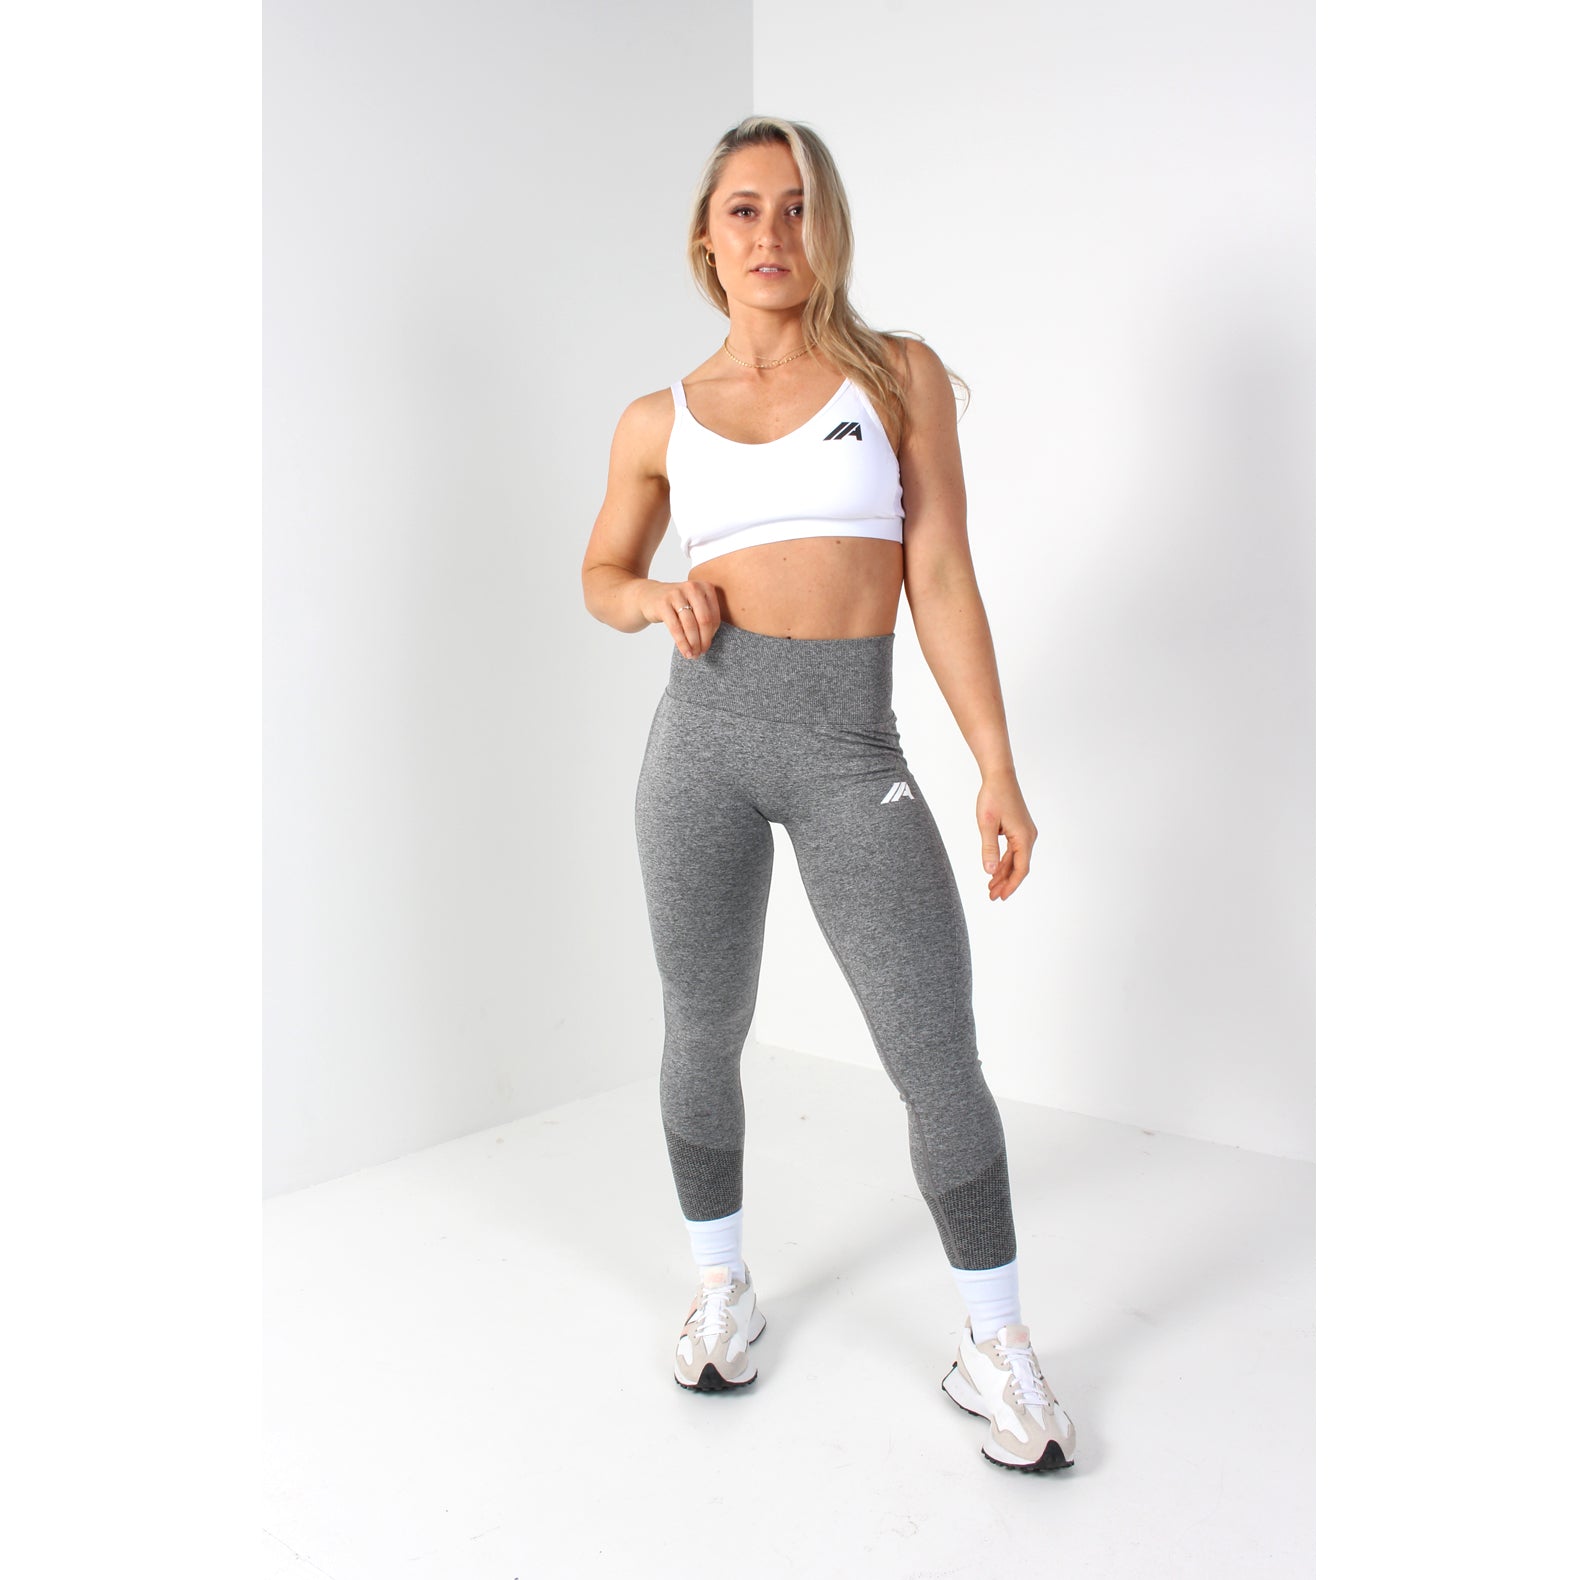 Sculpting Seamless Legging – Ares Lane Collection